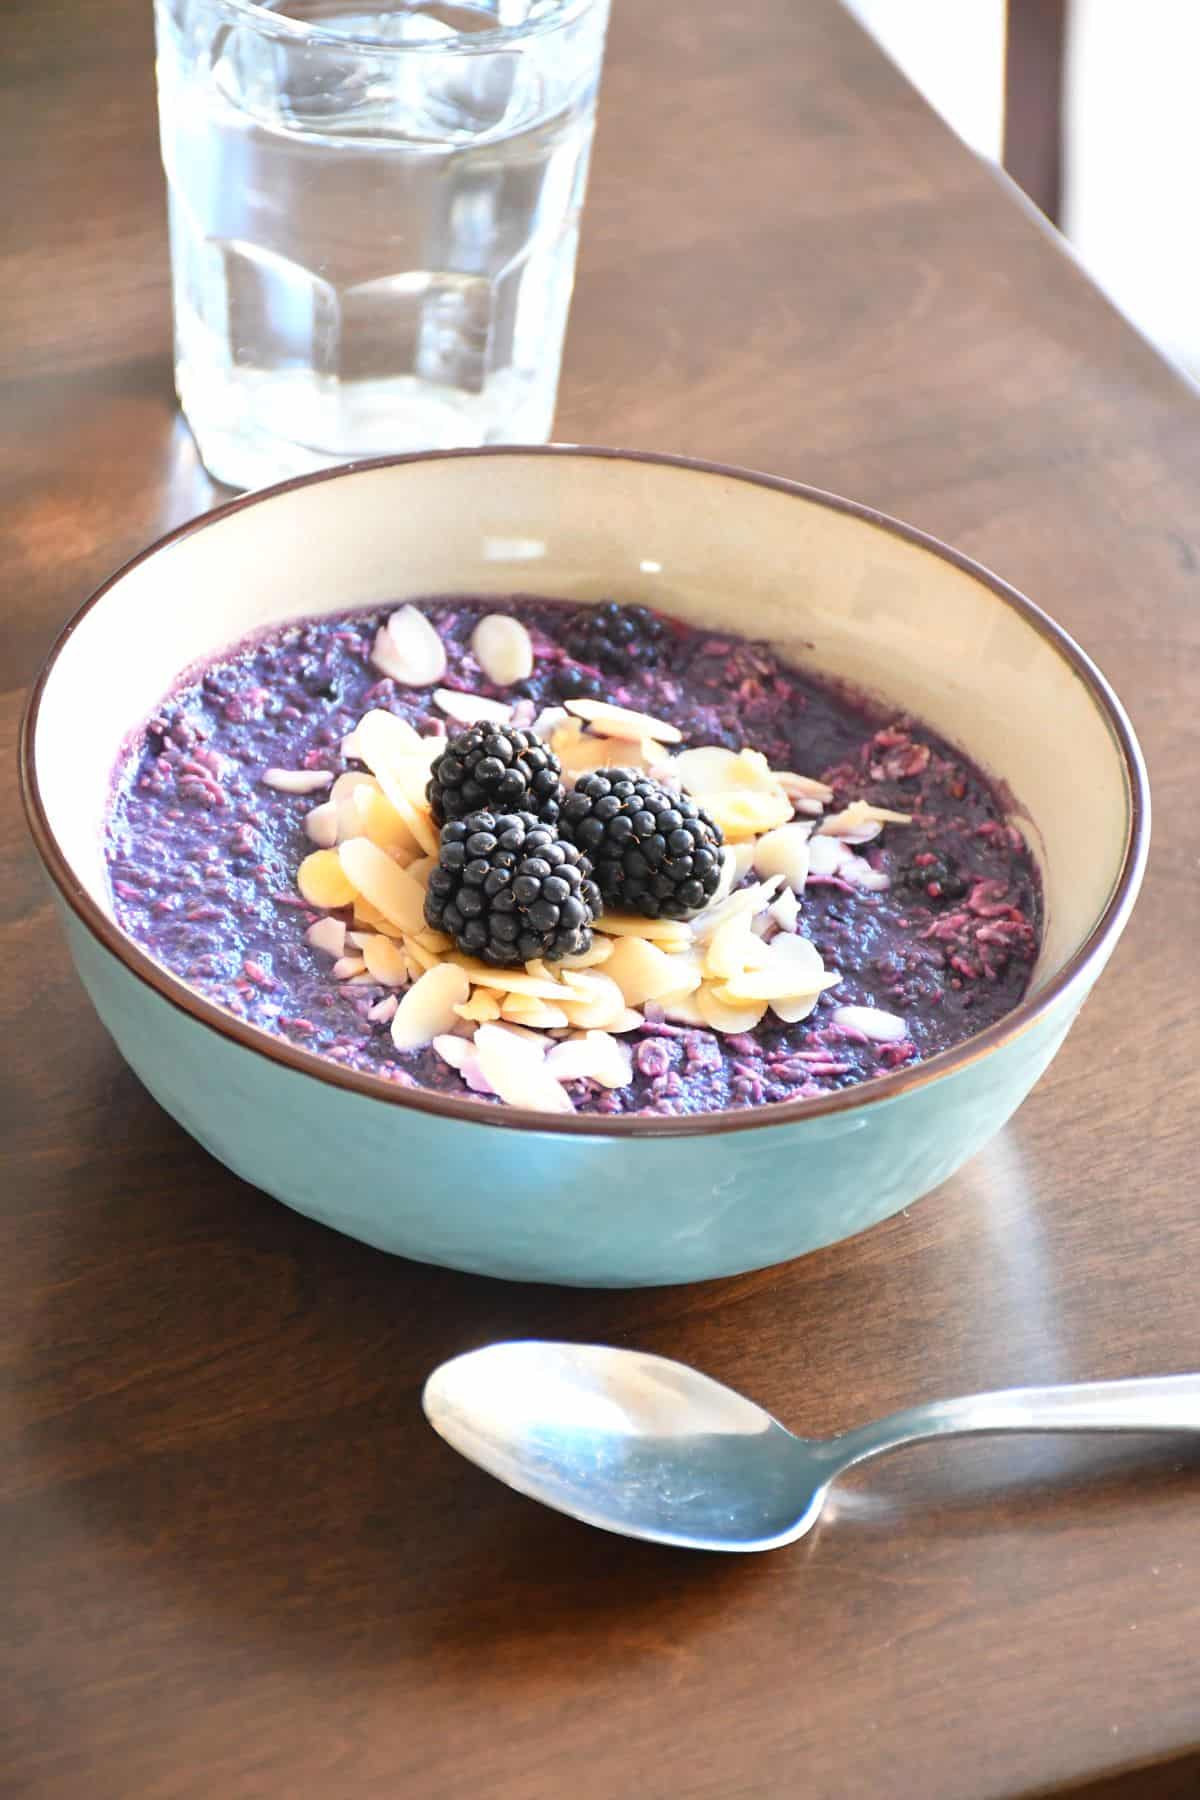 A double blackberry overnight oatmeal topped with sliced almonds and fresh blackberries featured in a blue ceramic bowl.